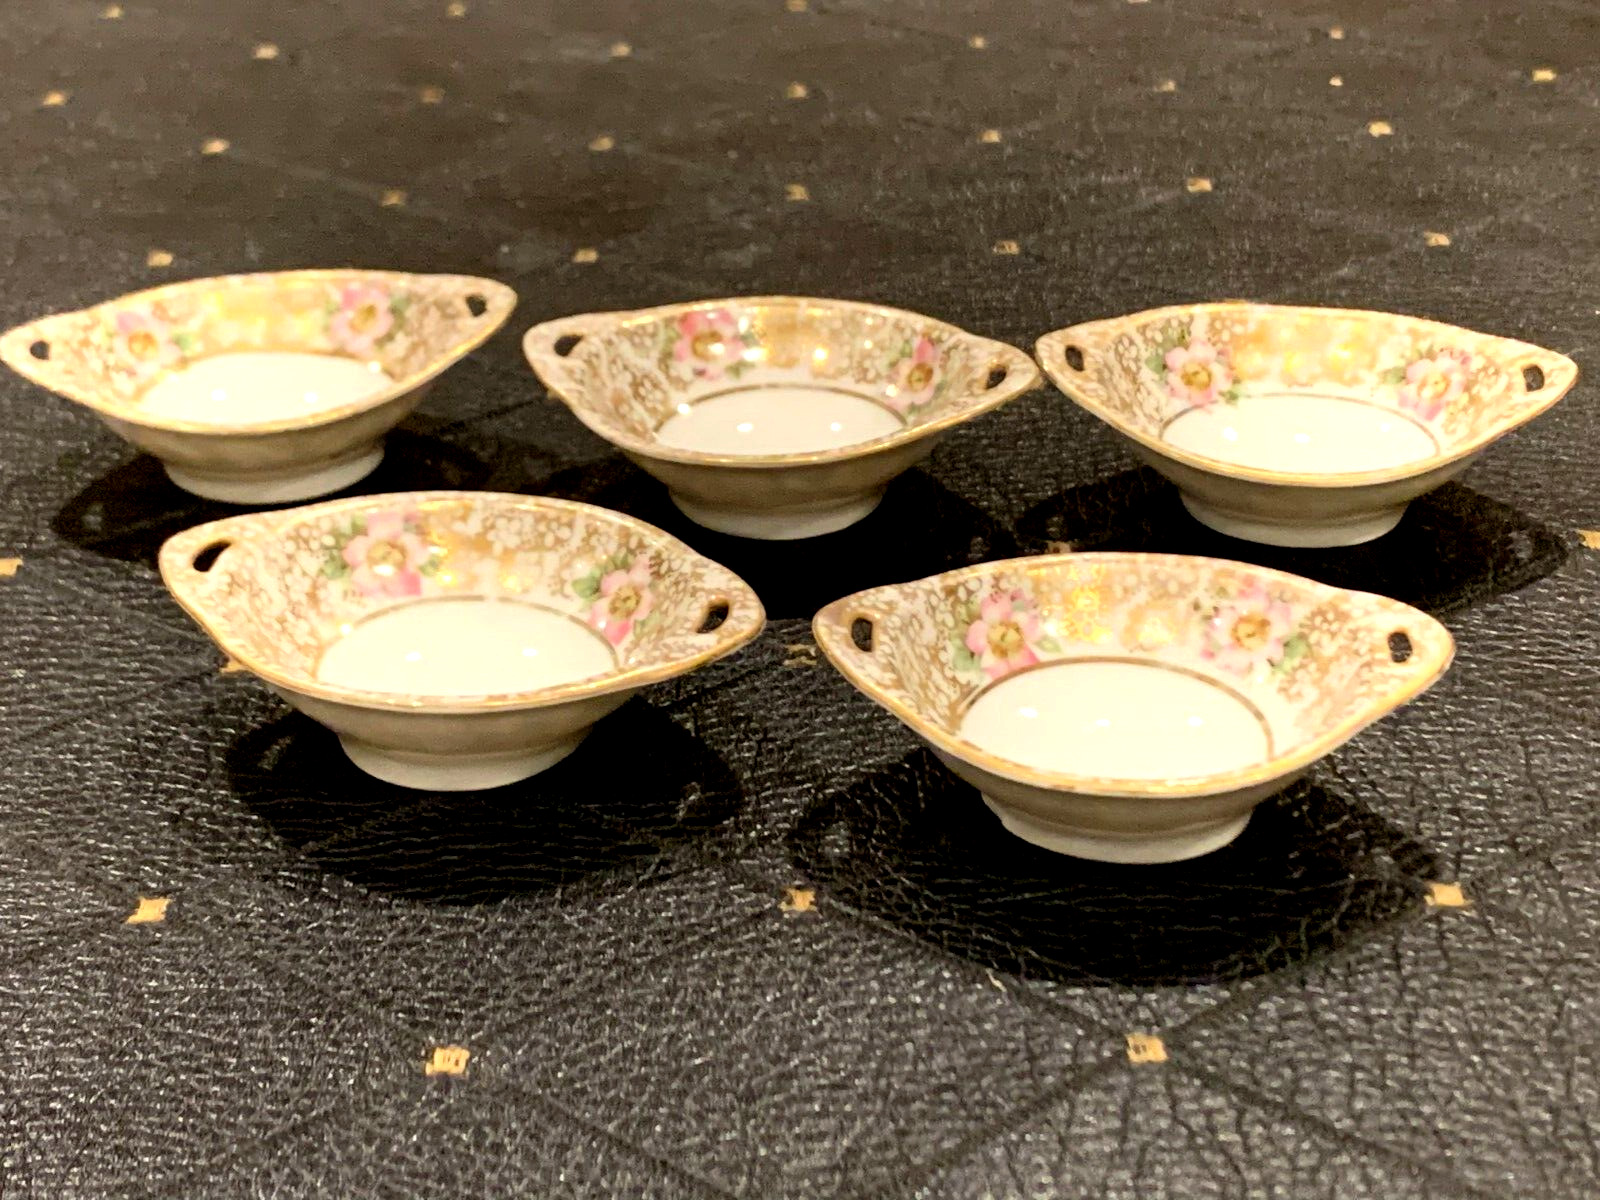 BEAUTIFUL HAND PAINTED SET OF 5 ANTIQUE R S GERMANY SMALL OVAL BOWLS FOR DESERT